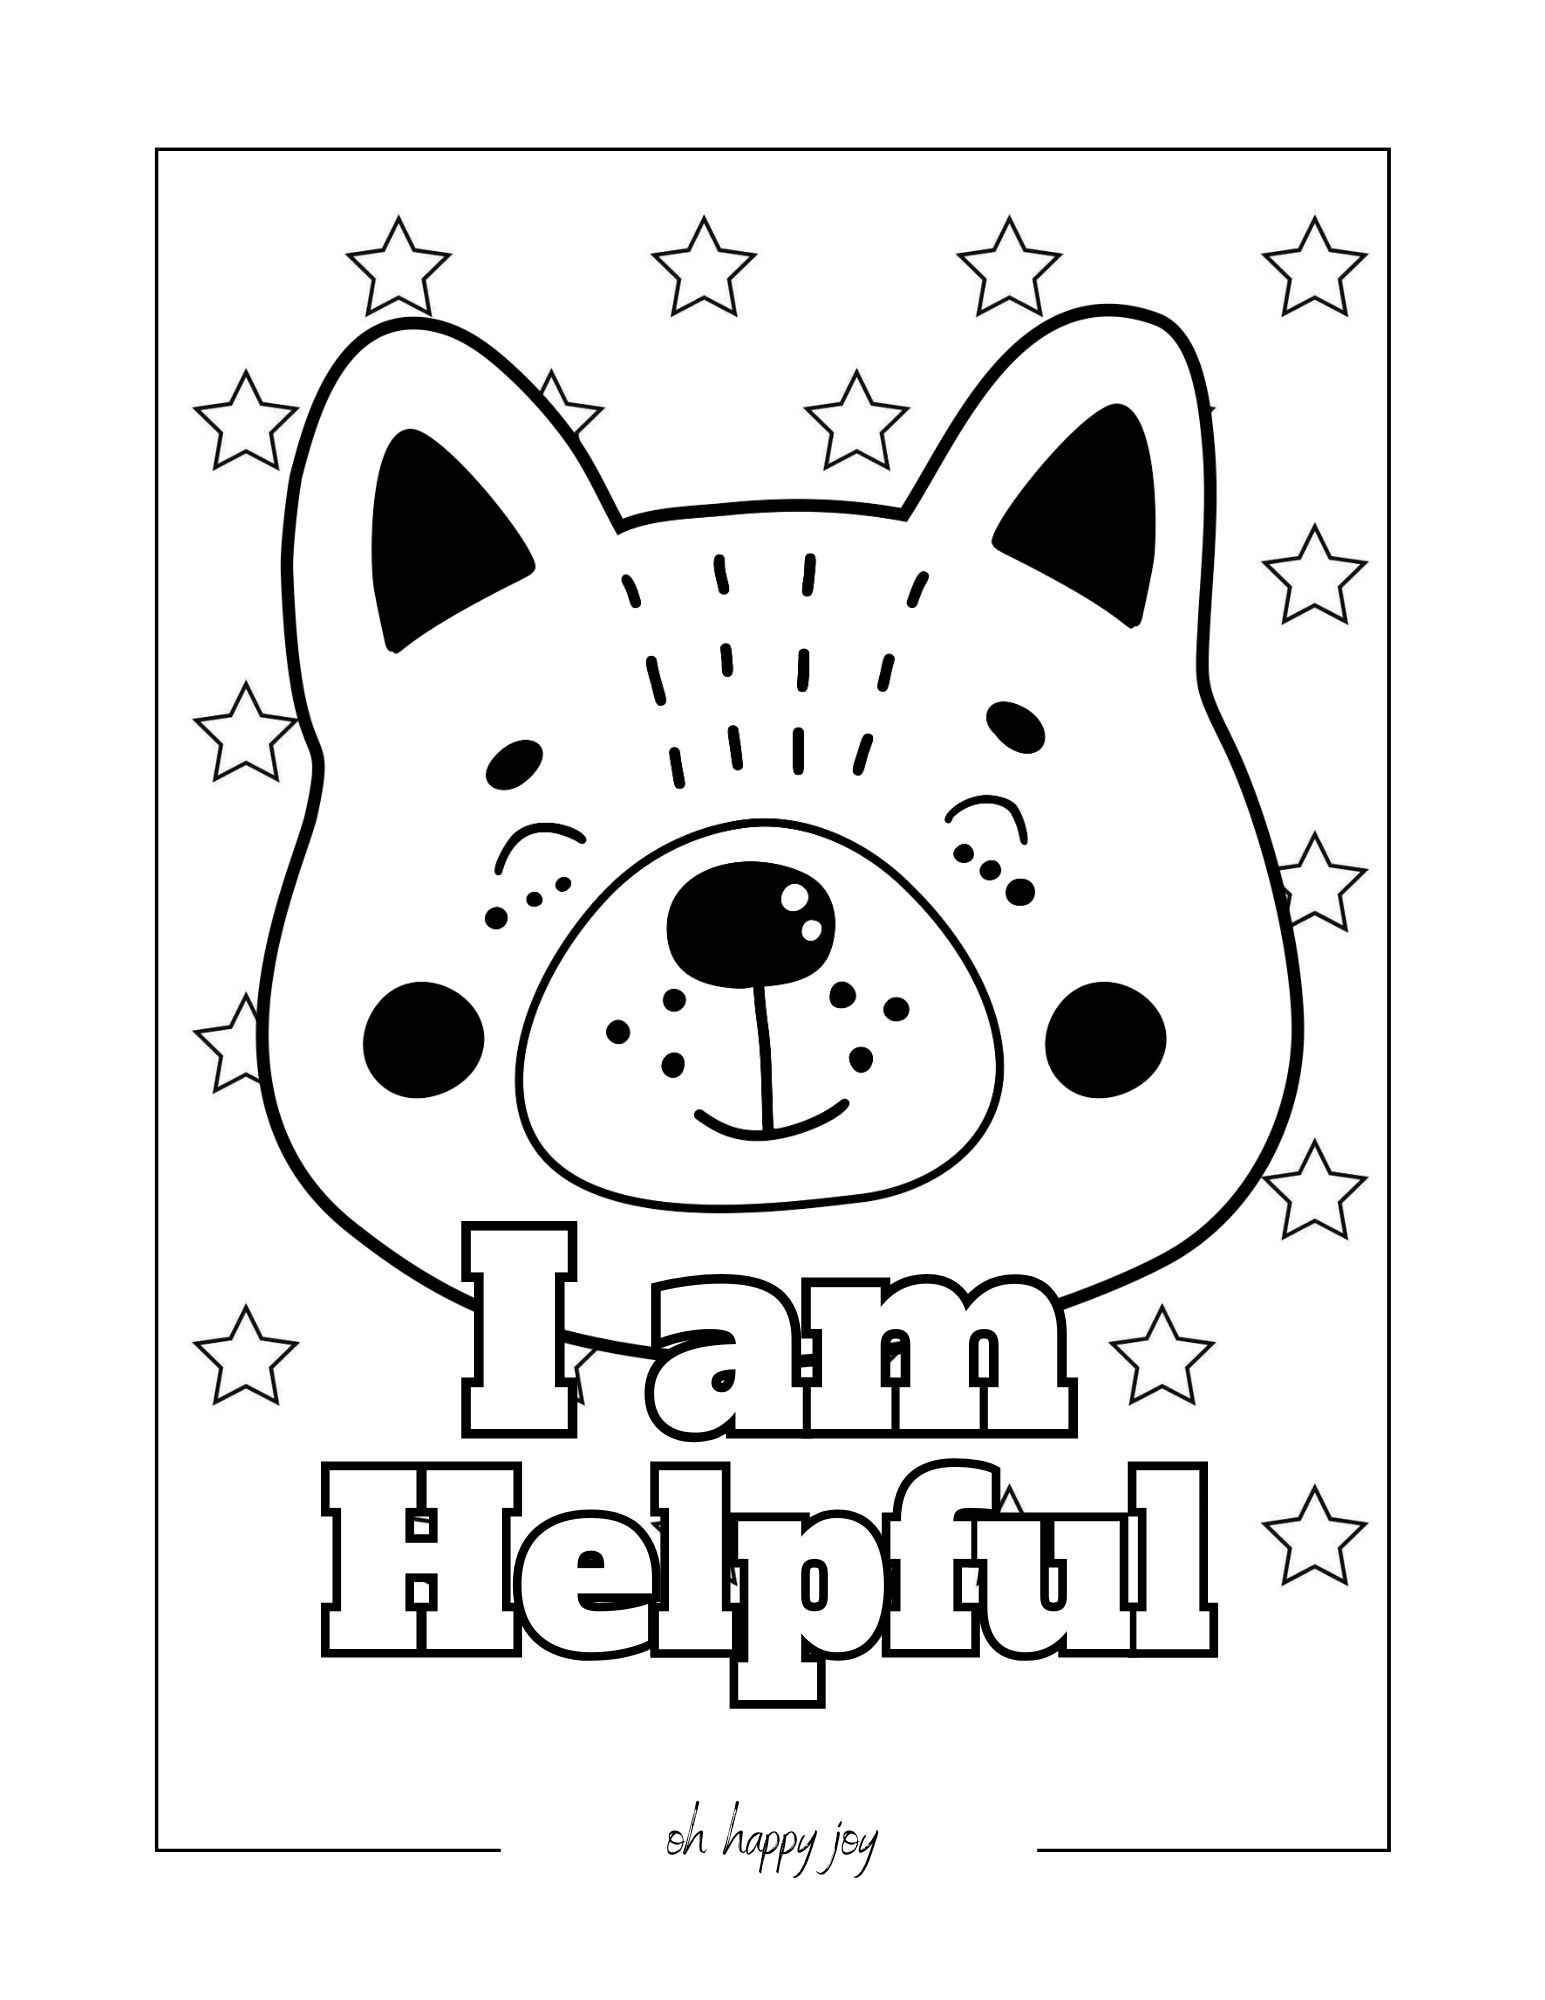 I am helpful affirmation coloring page